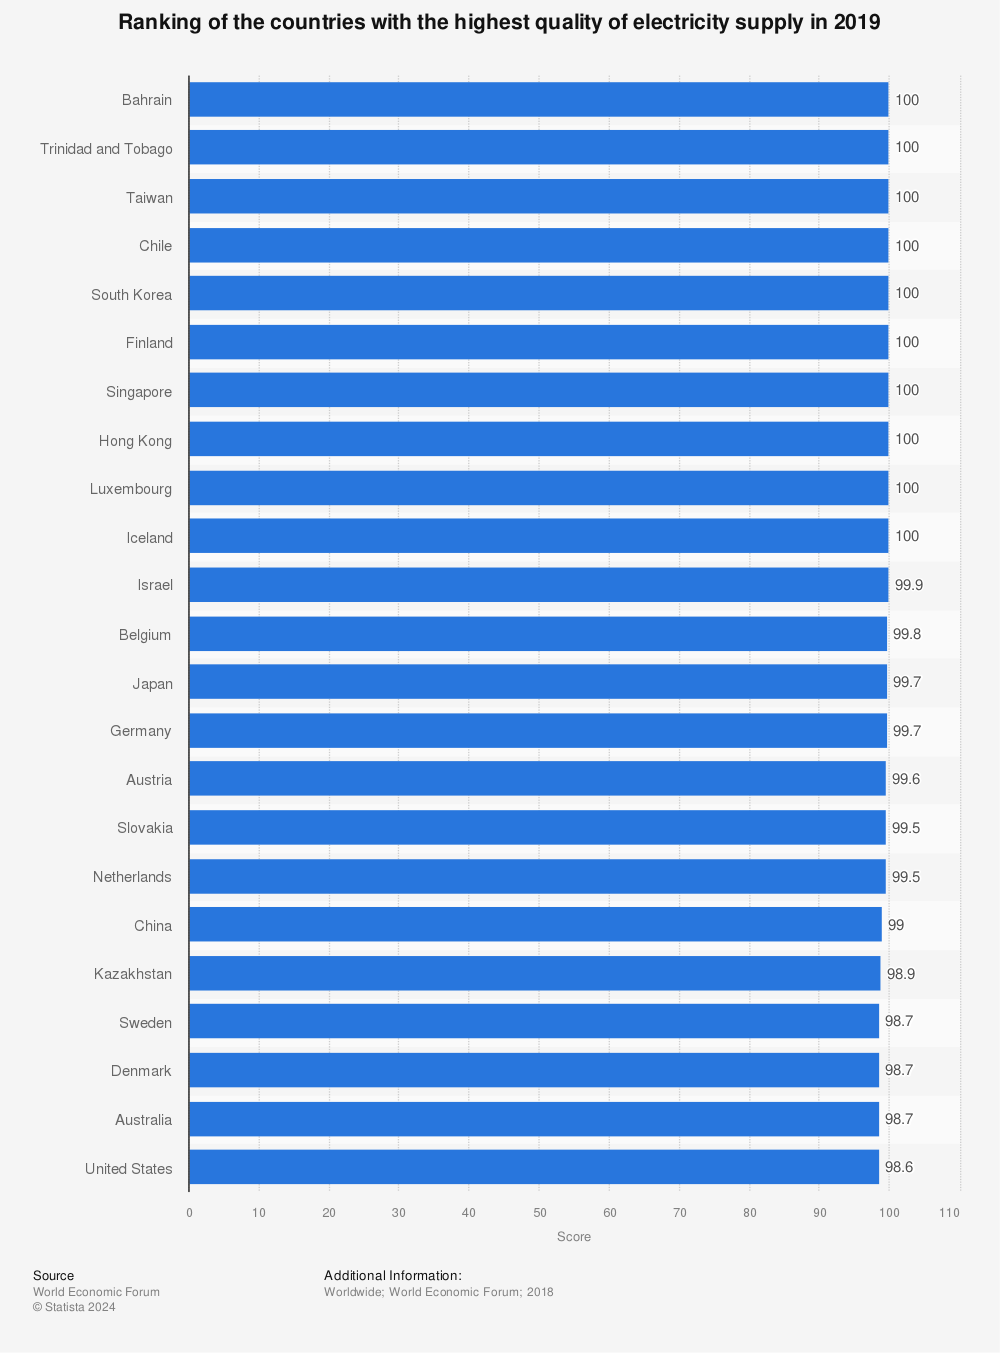 Statistic: Ranking of the countries with the highest quality of electricity supply in 2019 | Statista